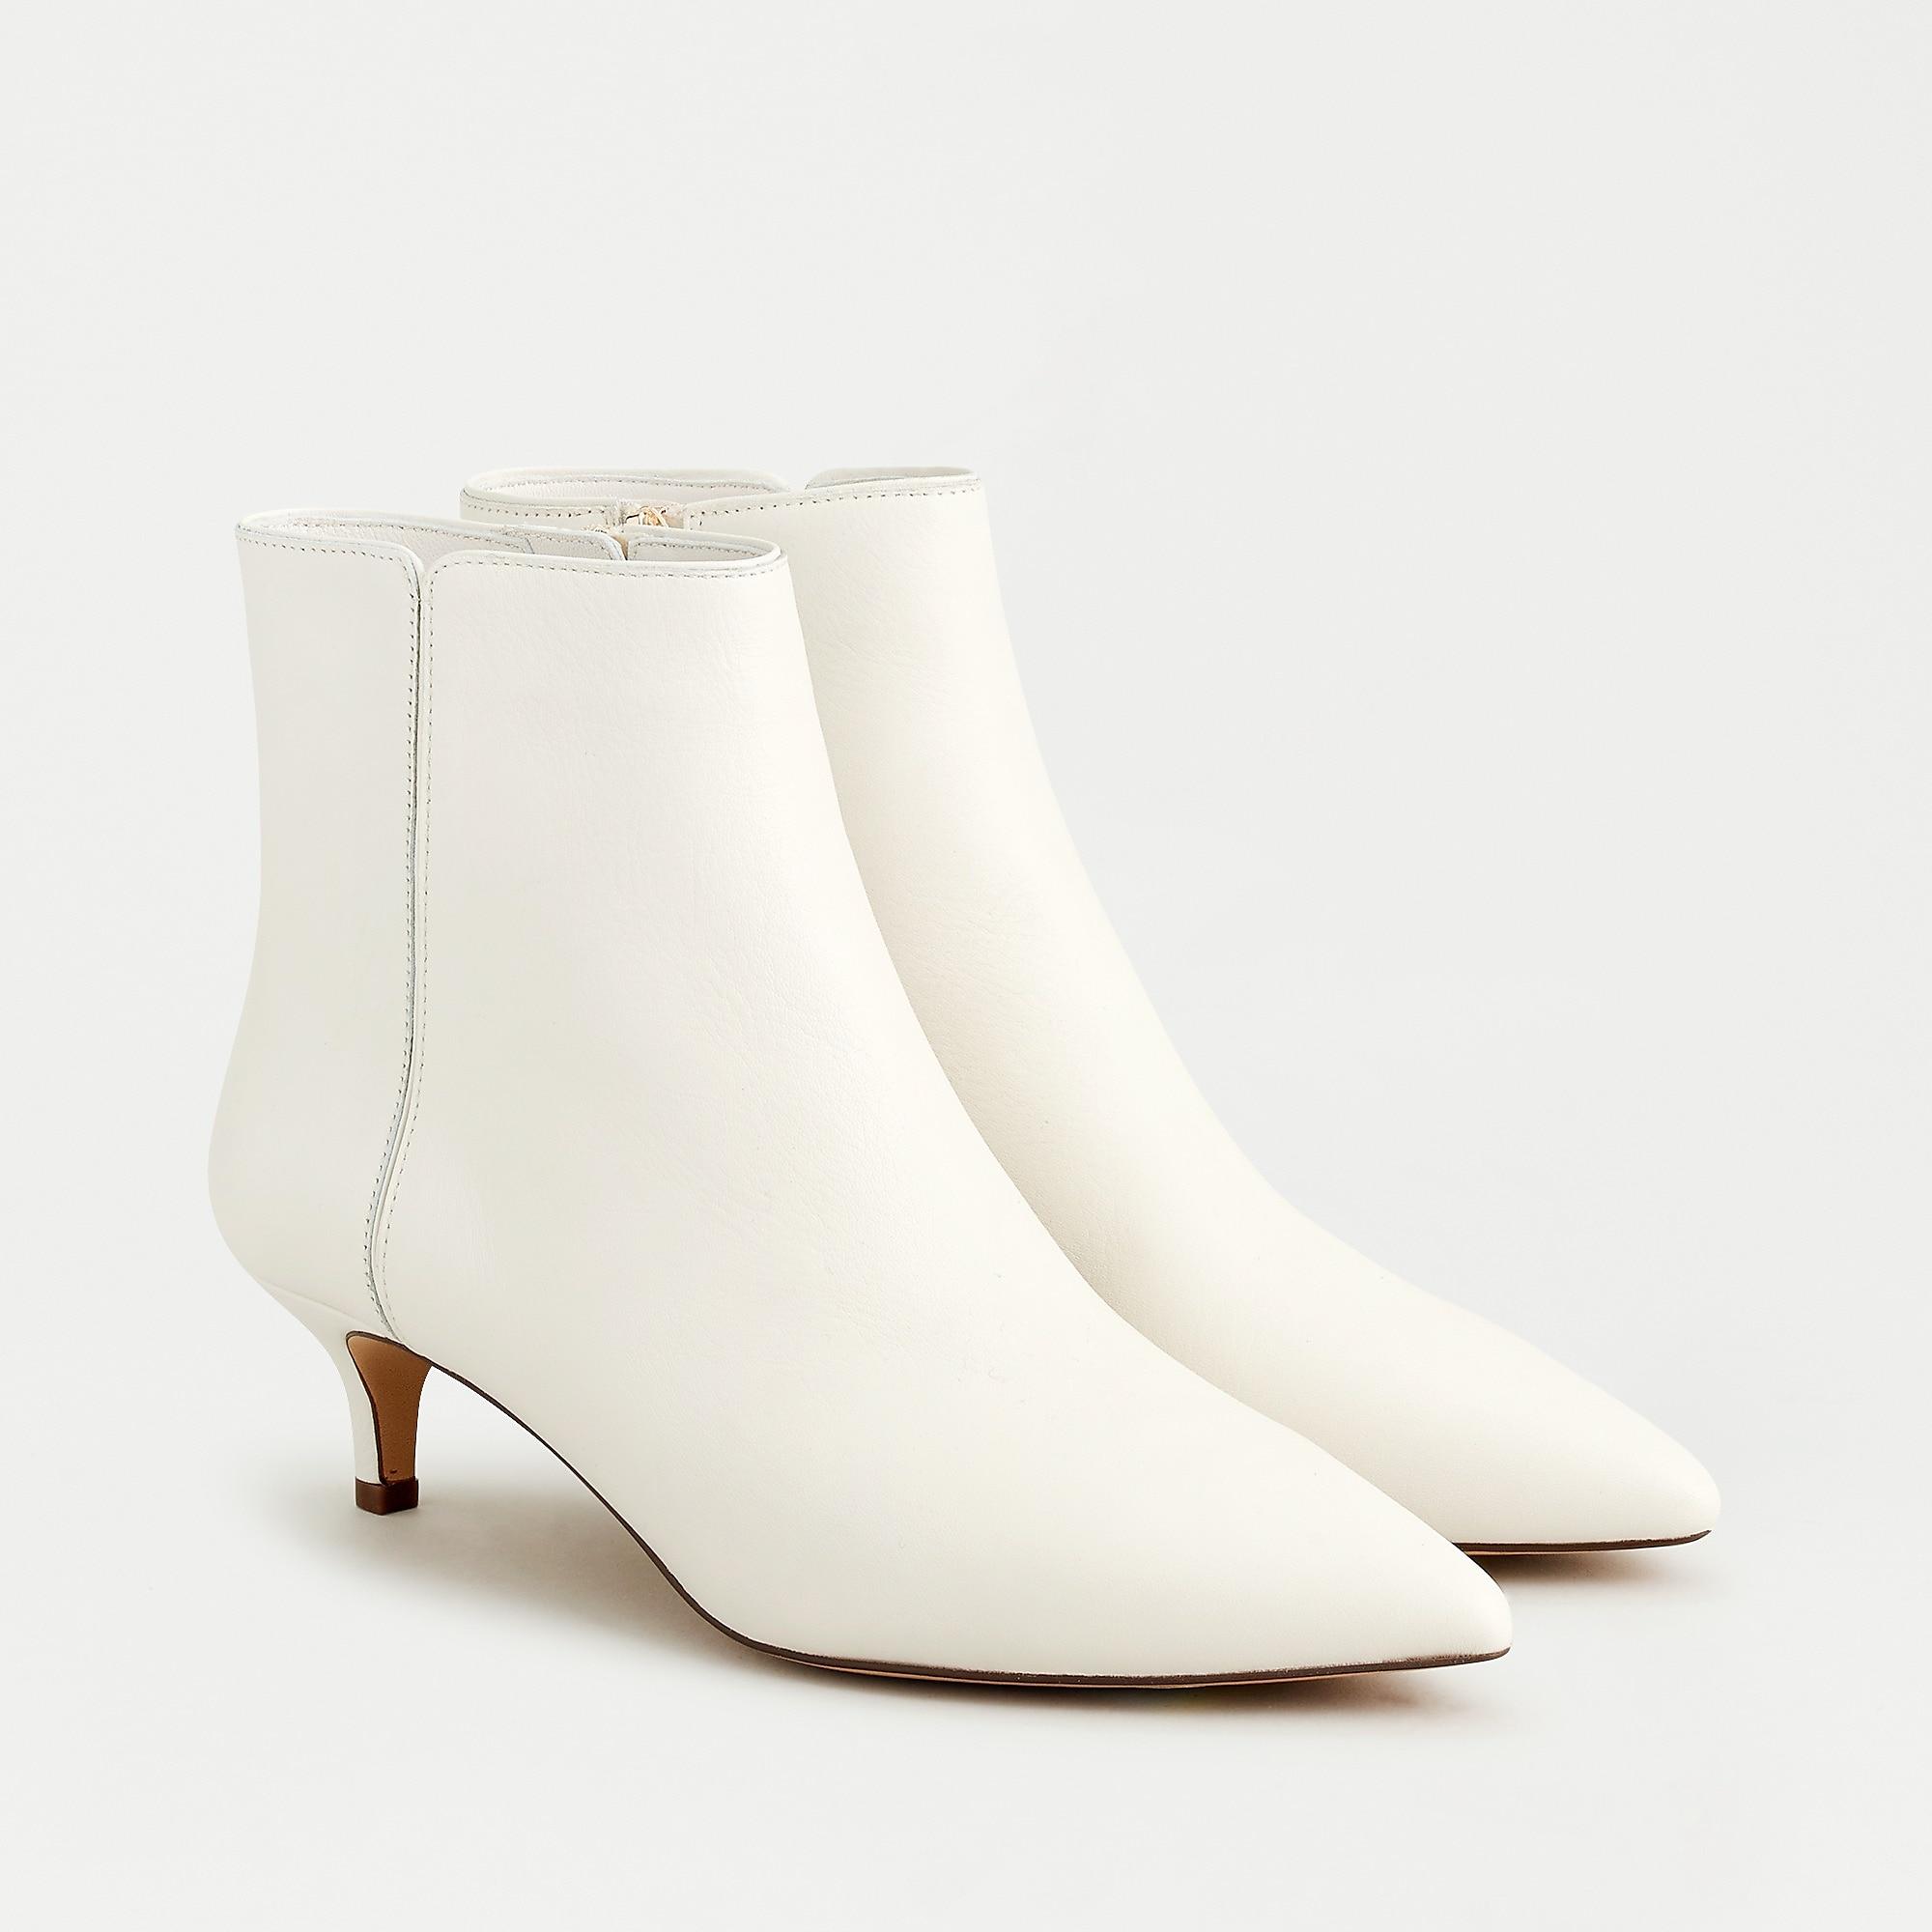 J.Crew Fiona Kitten-heel Ankle Boots In Leather in White | Lyst